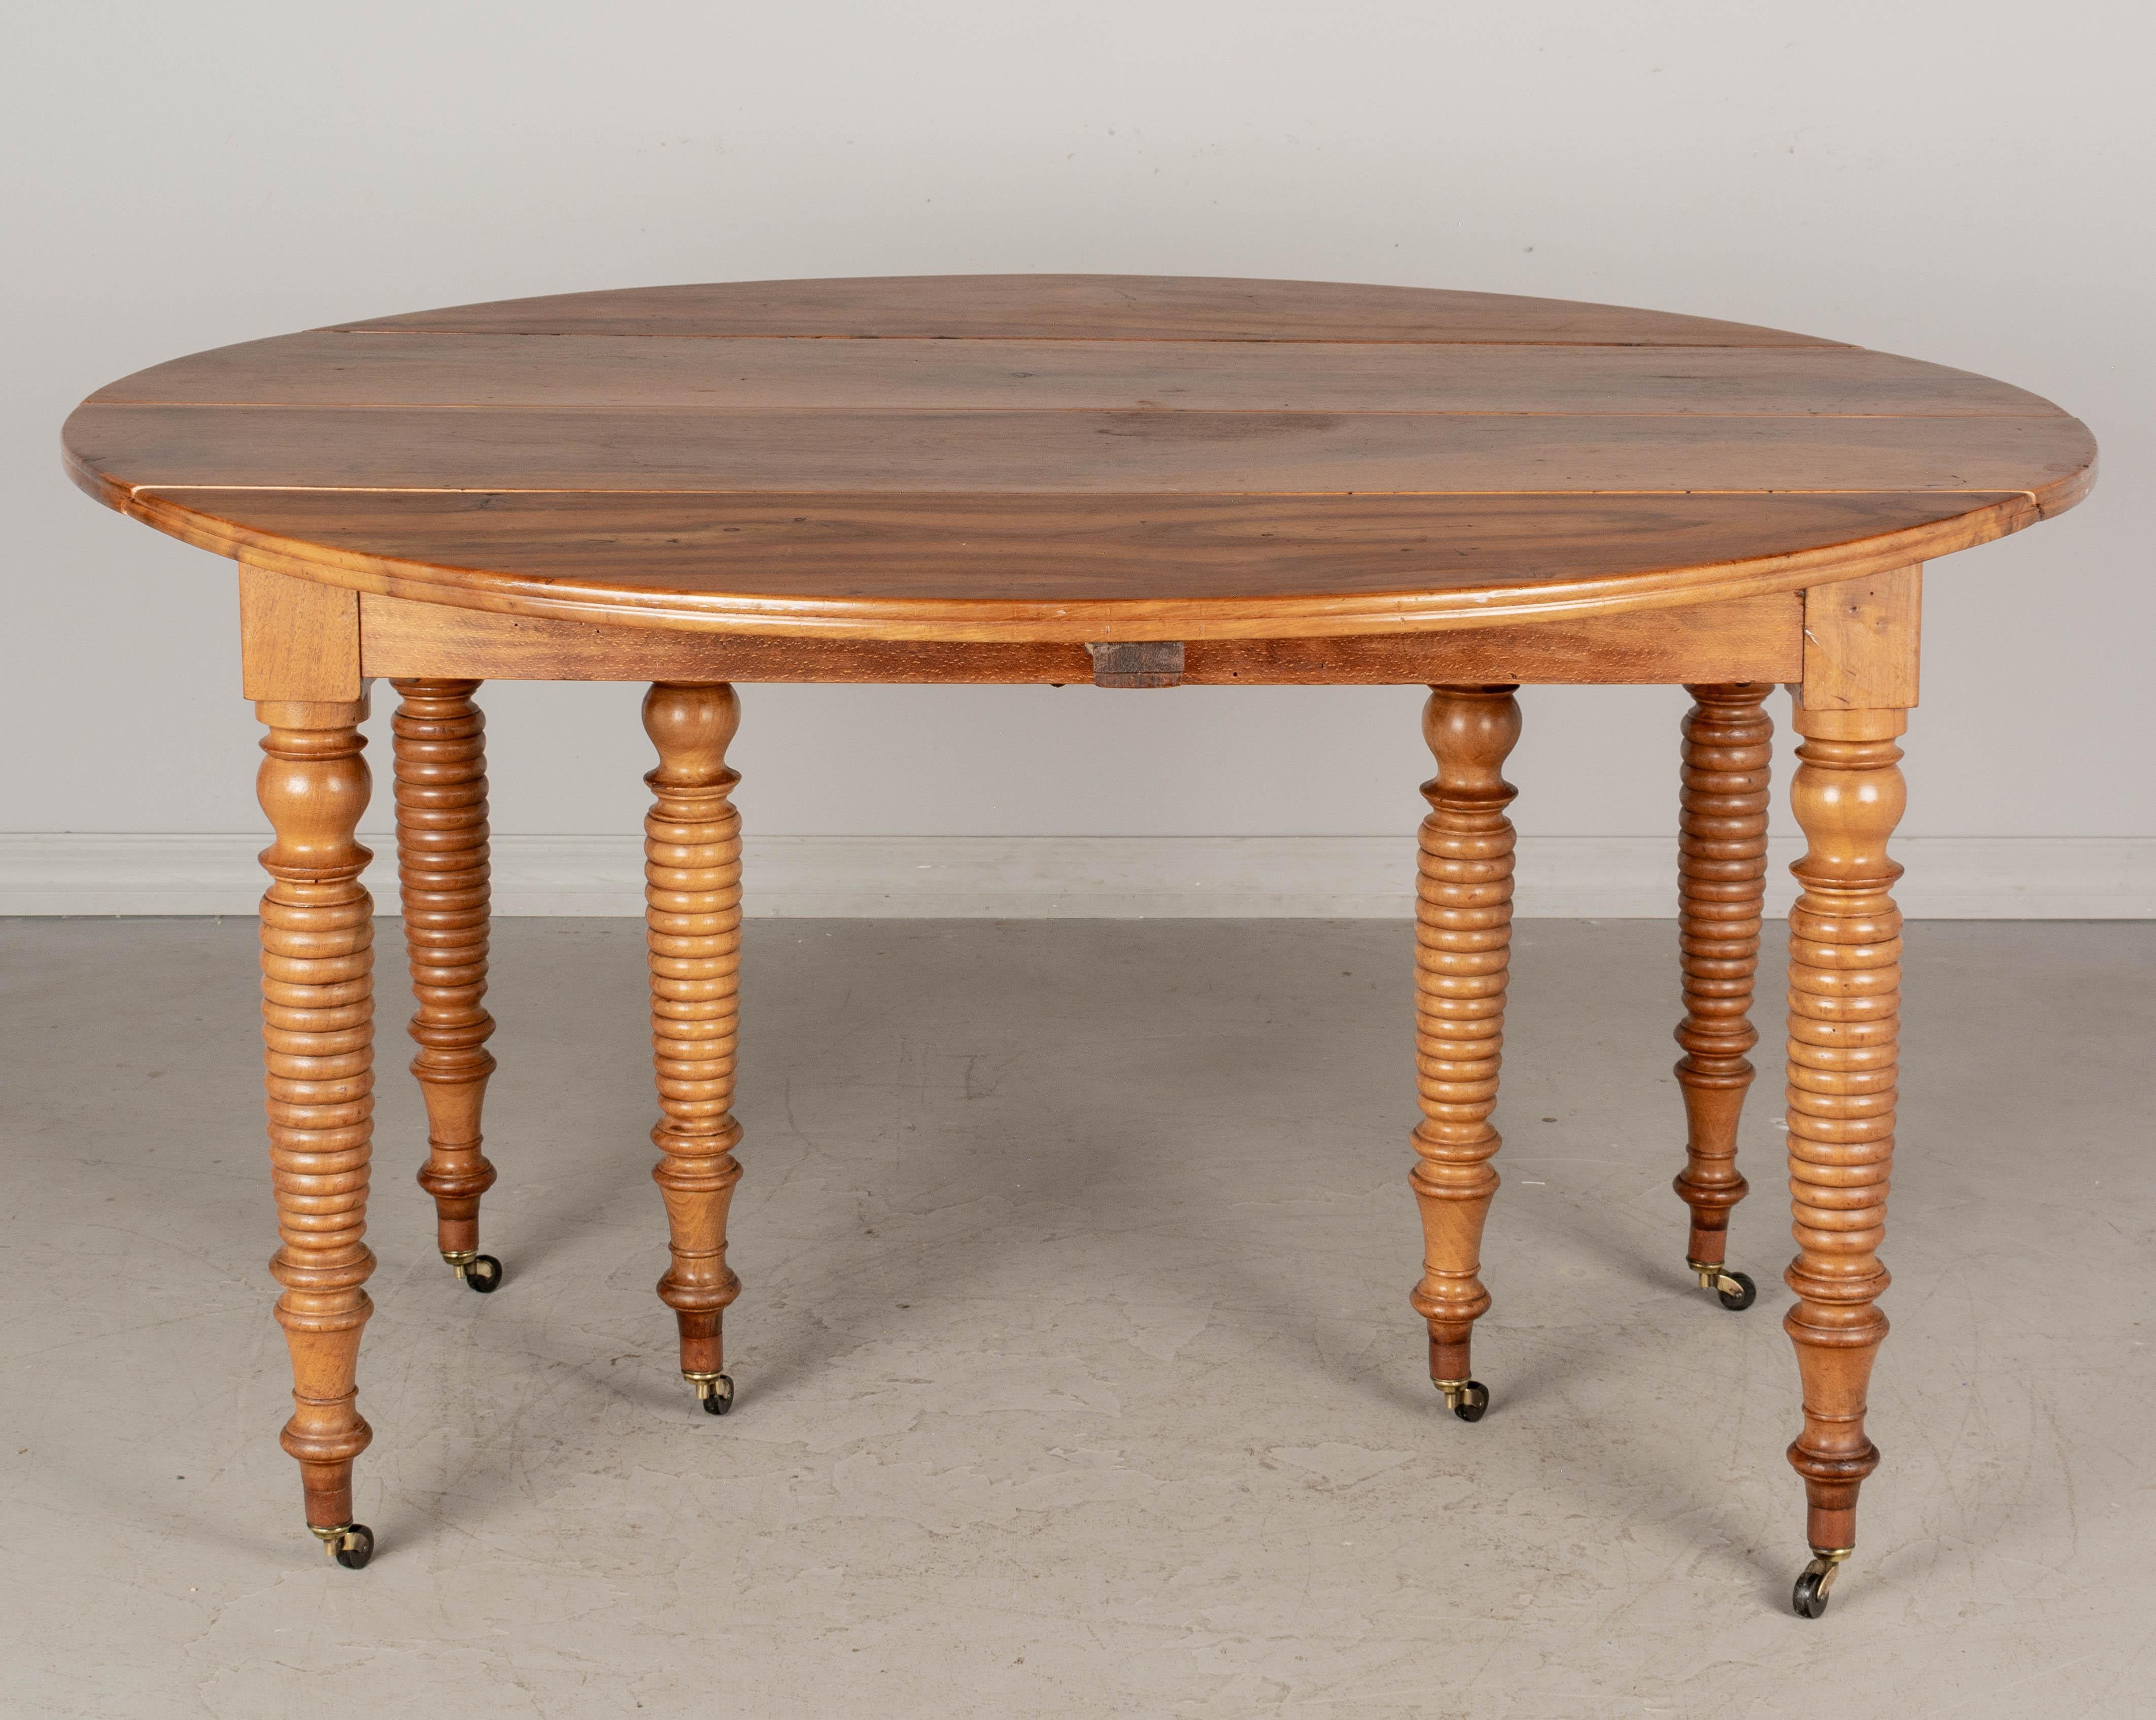 A 19th century French Country Louis Philippe style drop-leaf dining table. Made of walnut with six turned legs on new brass castors. Legs have been lengthened so the table is a good height for dining. Three yellow pine leaves are newer and 19